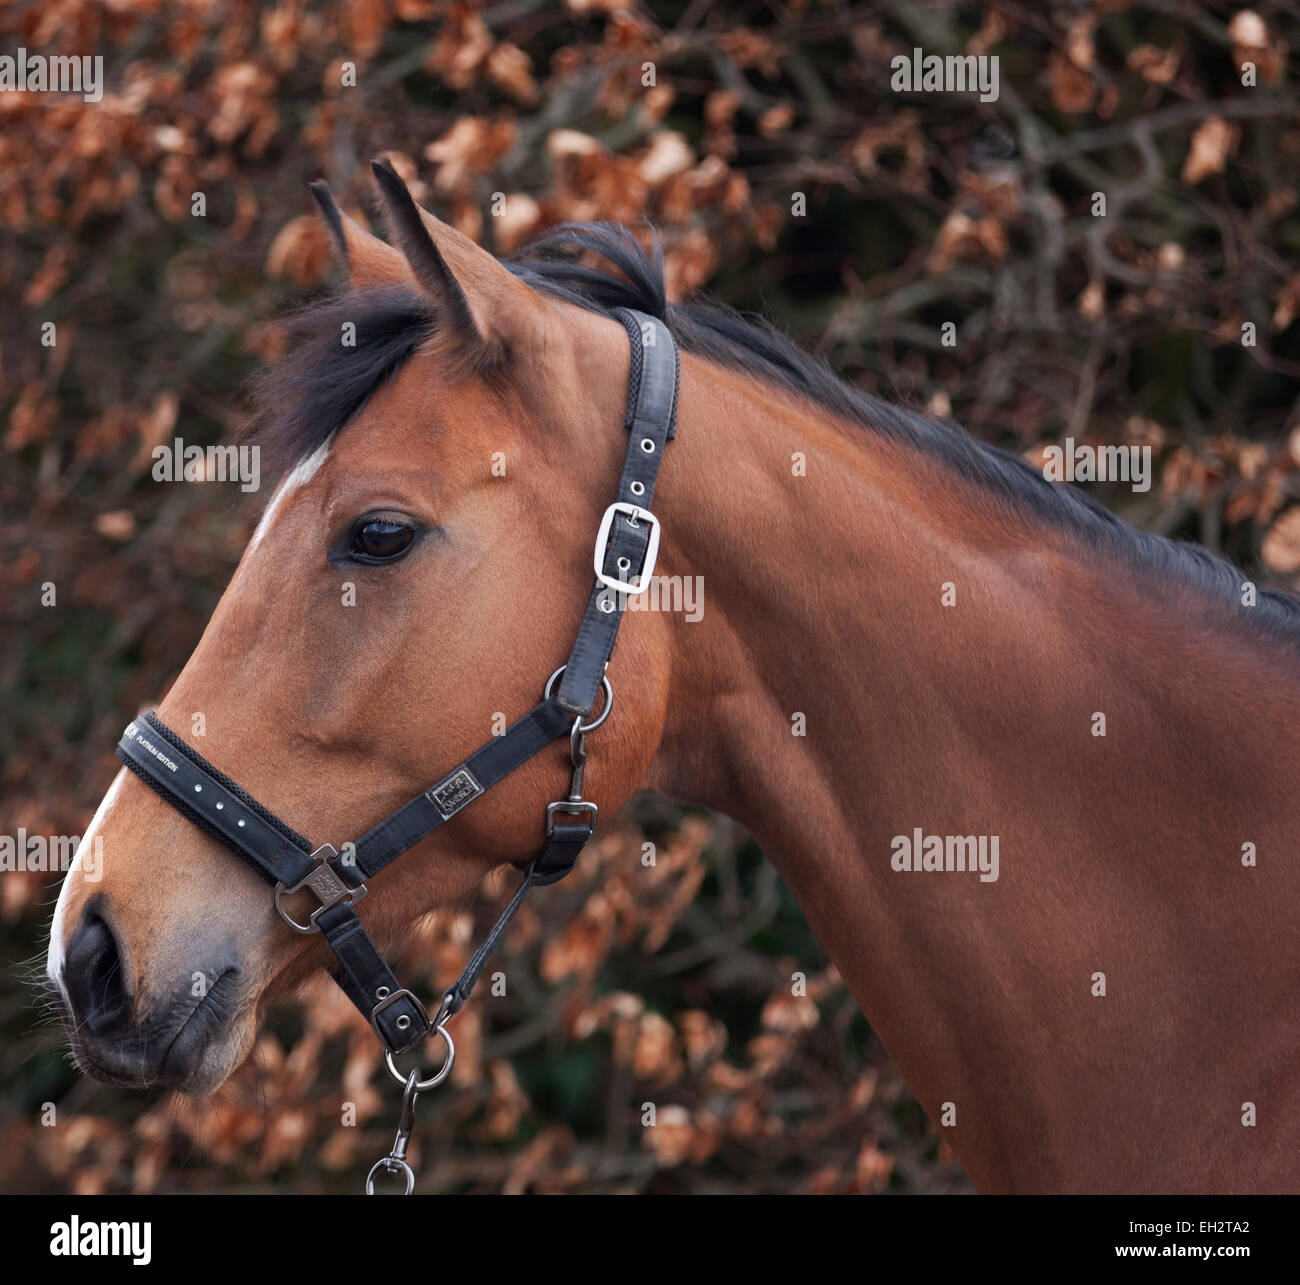 A portrait of a Thoroughbred horse Stock Photo